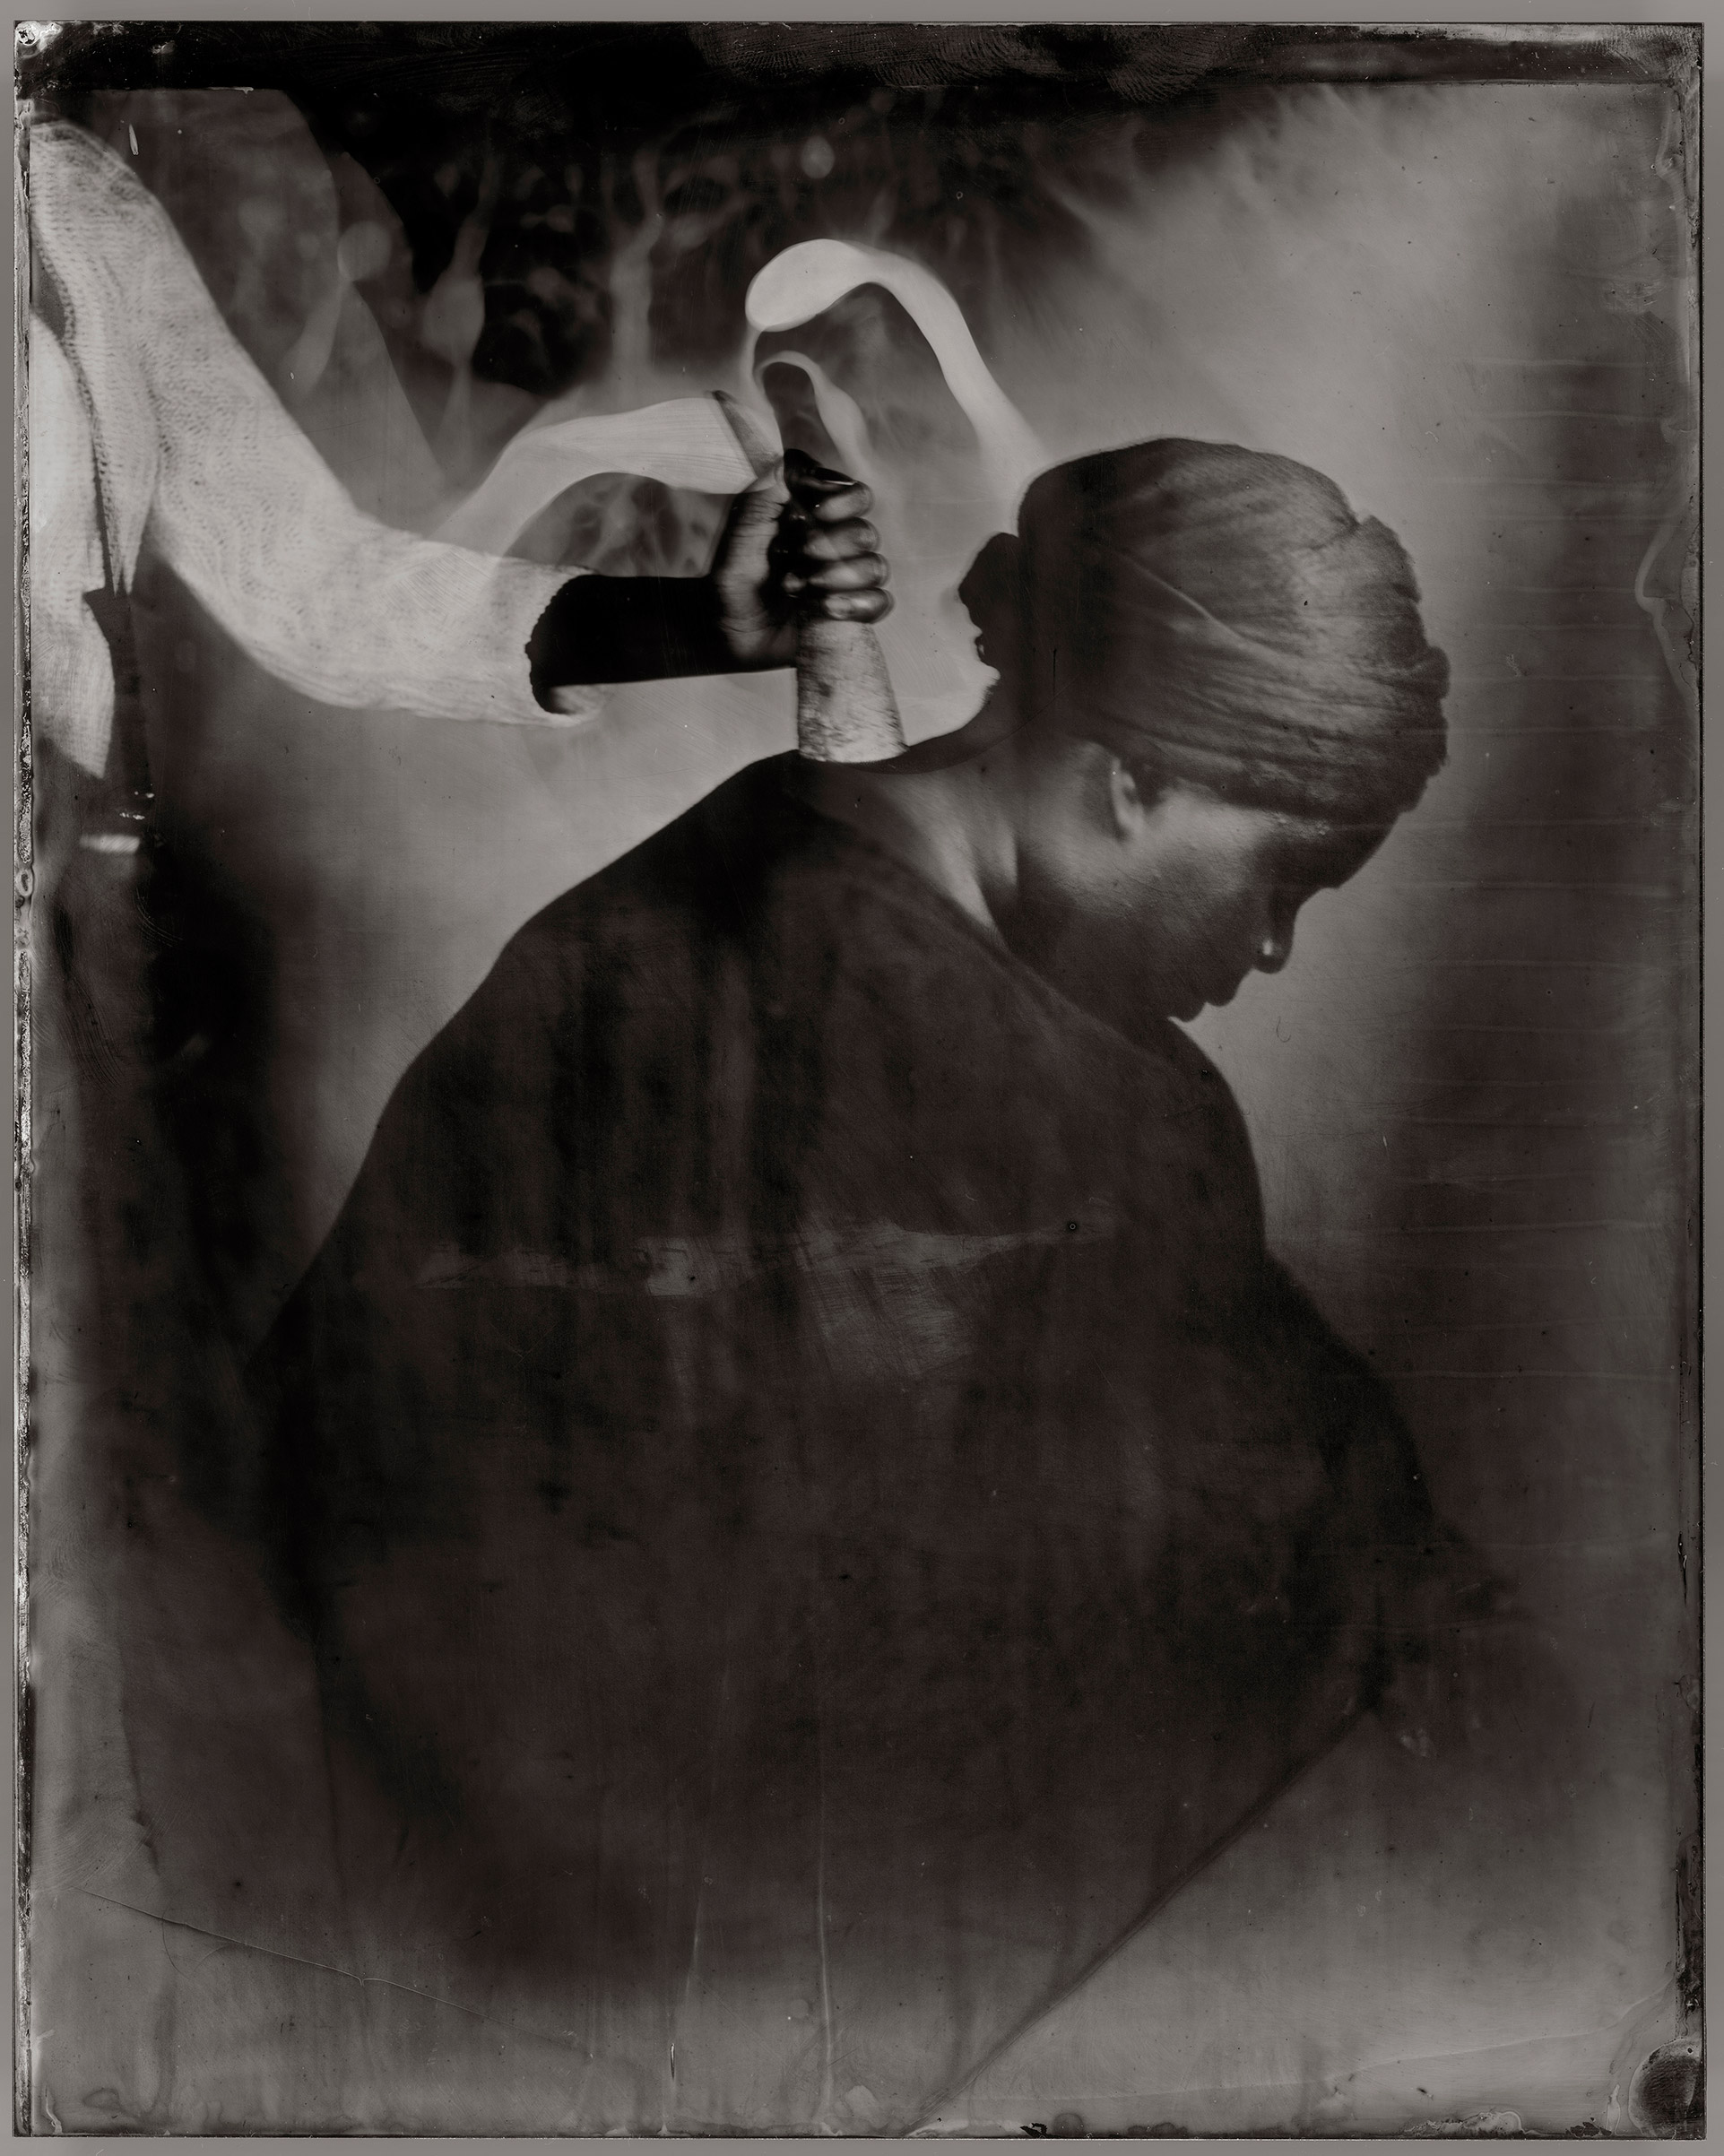 Khadija Saye photograph from Dwelling: in the space we breathe.